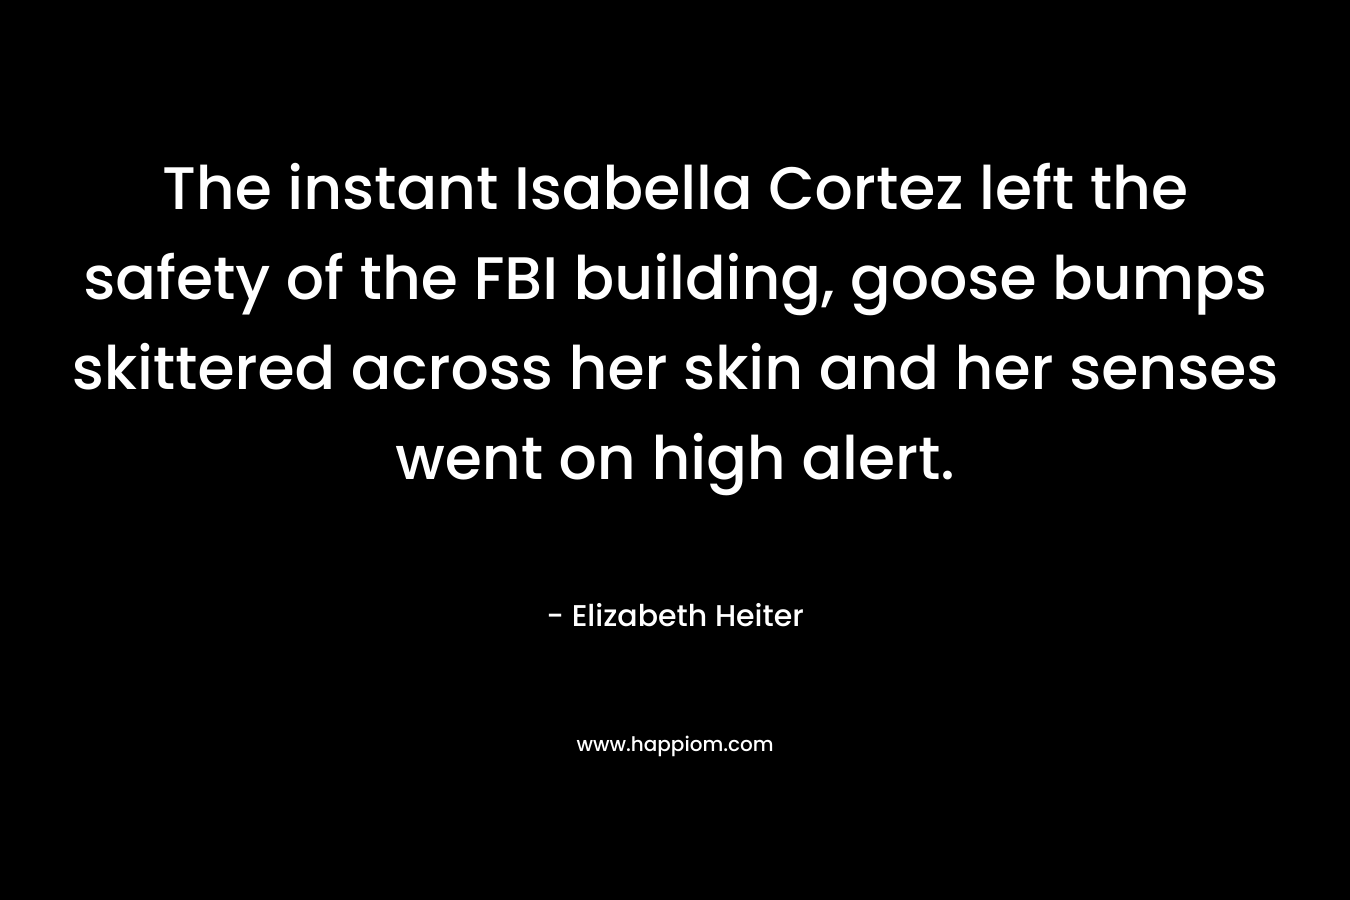 The instant Isabella Cortez left the safety of the FBI building, goose bumps skittered across her skin and her senses went on high alert. – Elizabeth Heiter